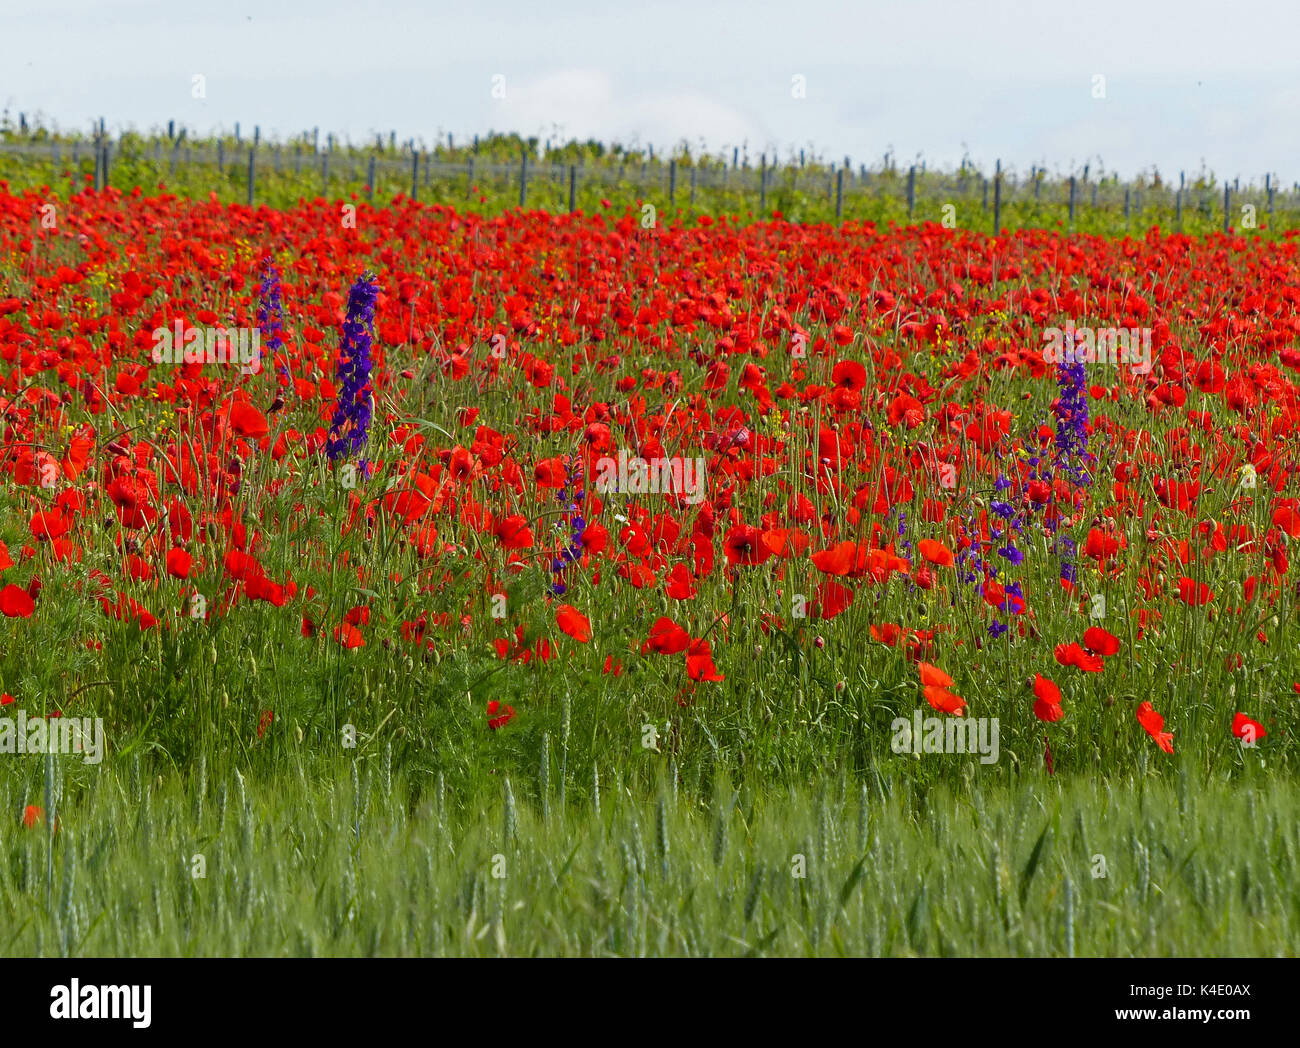 Bright Red Field With Corn Poppies And Behind There Is A Vineyard, Wine-Growing Region Rhinehesse Stock Photo